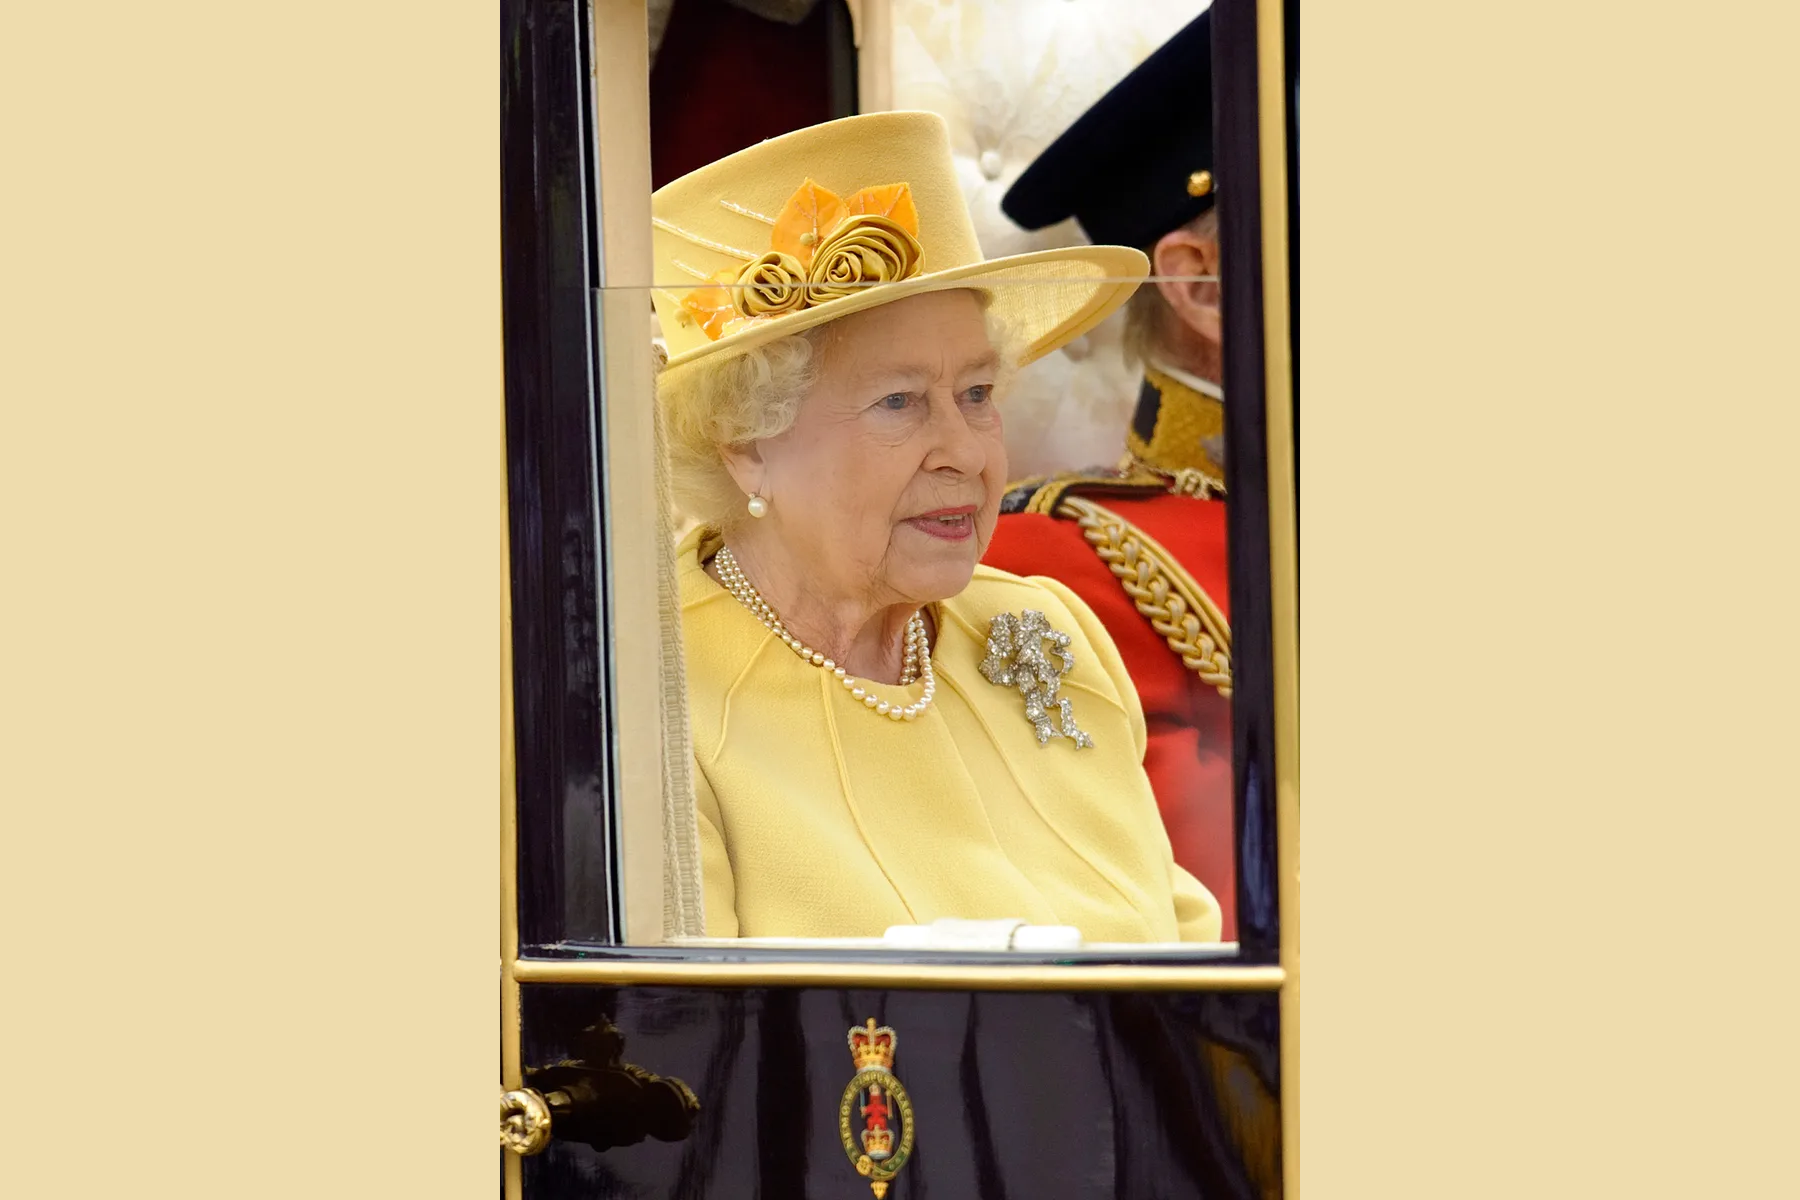 Queen Elizabeth II rode with her husband while wearing a lovers' knot brooch